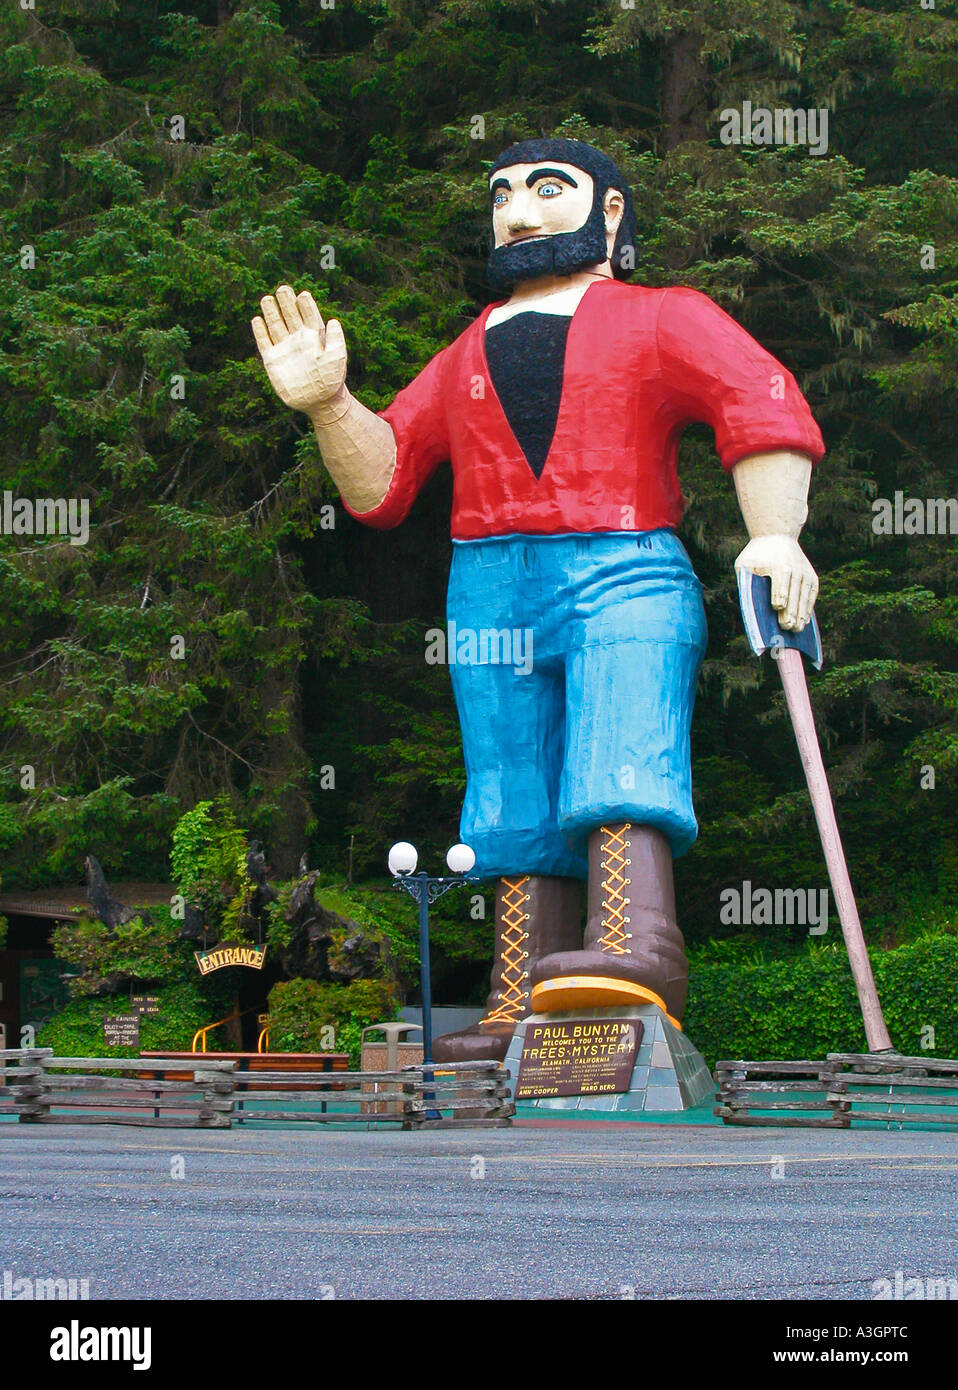 Paul Bunyan statue at Trees of Mystery visitor attraction in the Redwoods on Hwy 101 near Klamath California Stock Photo